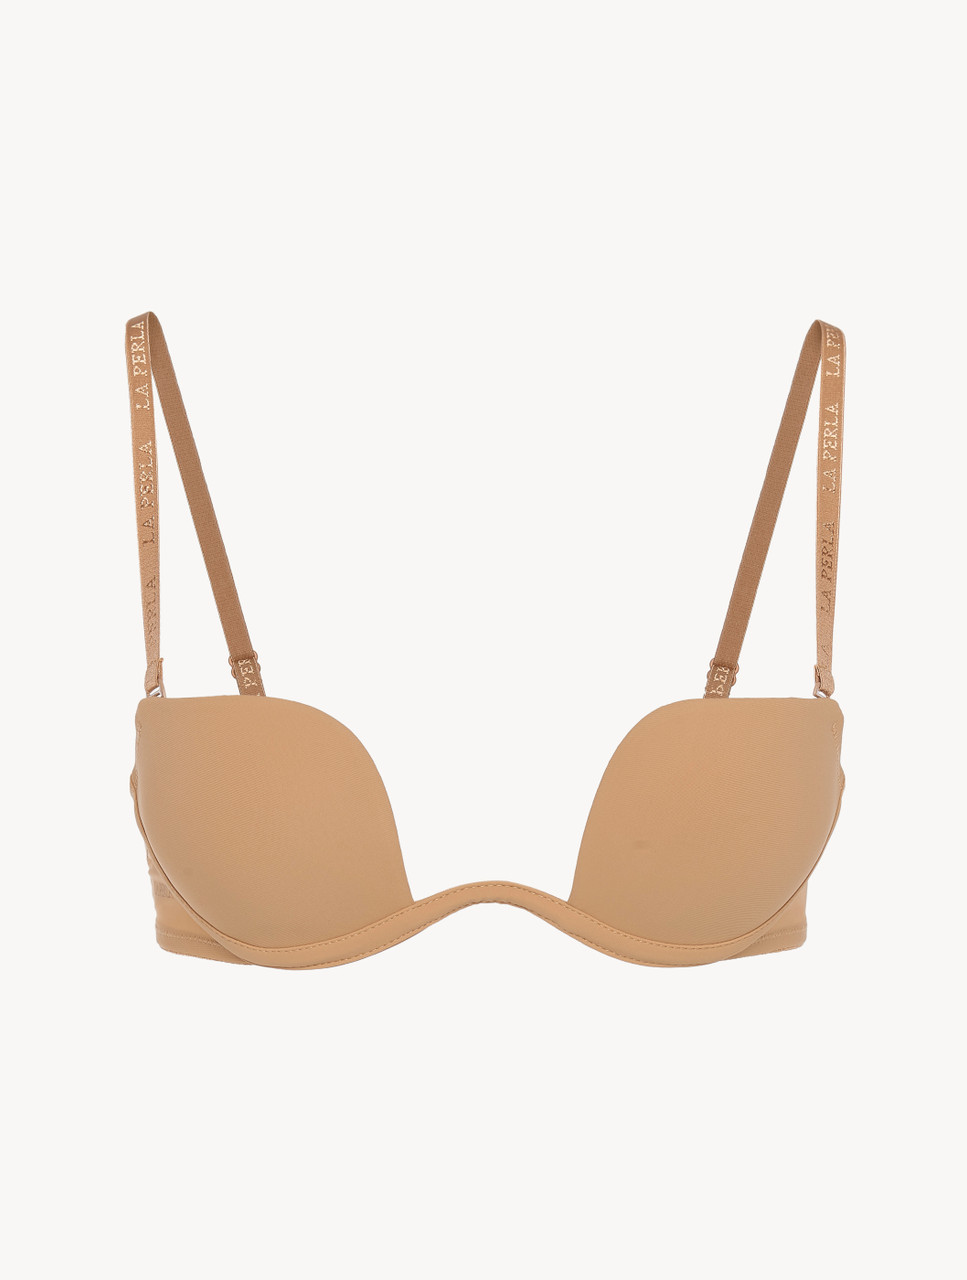 Underwired push-up multiway bra in nude